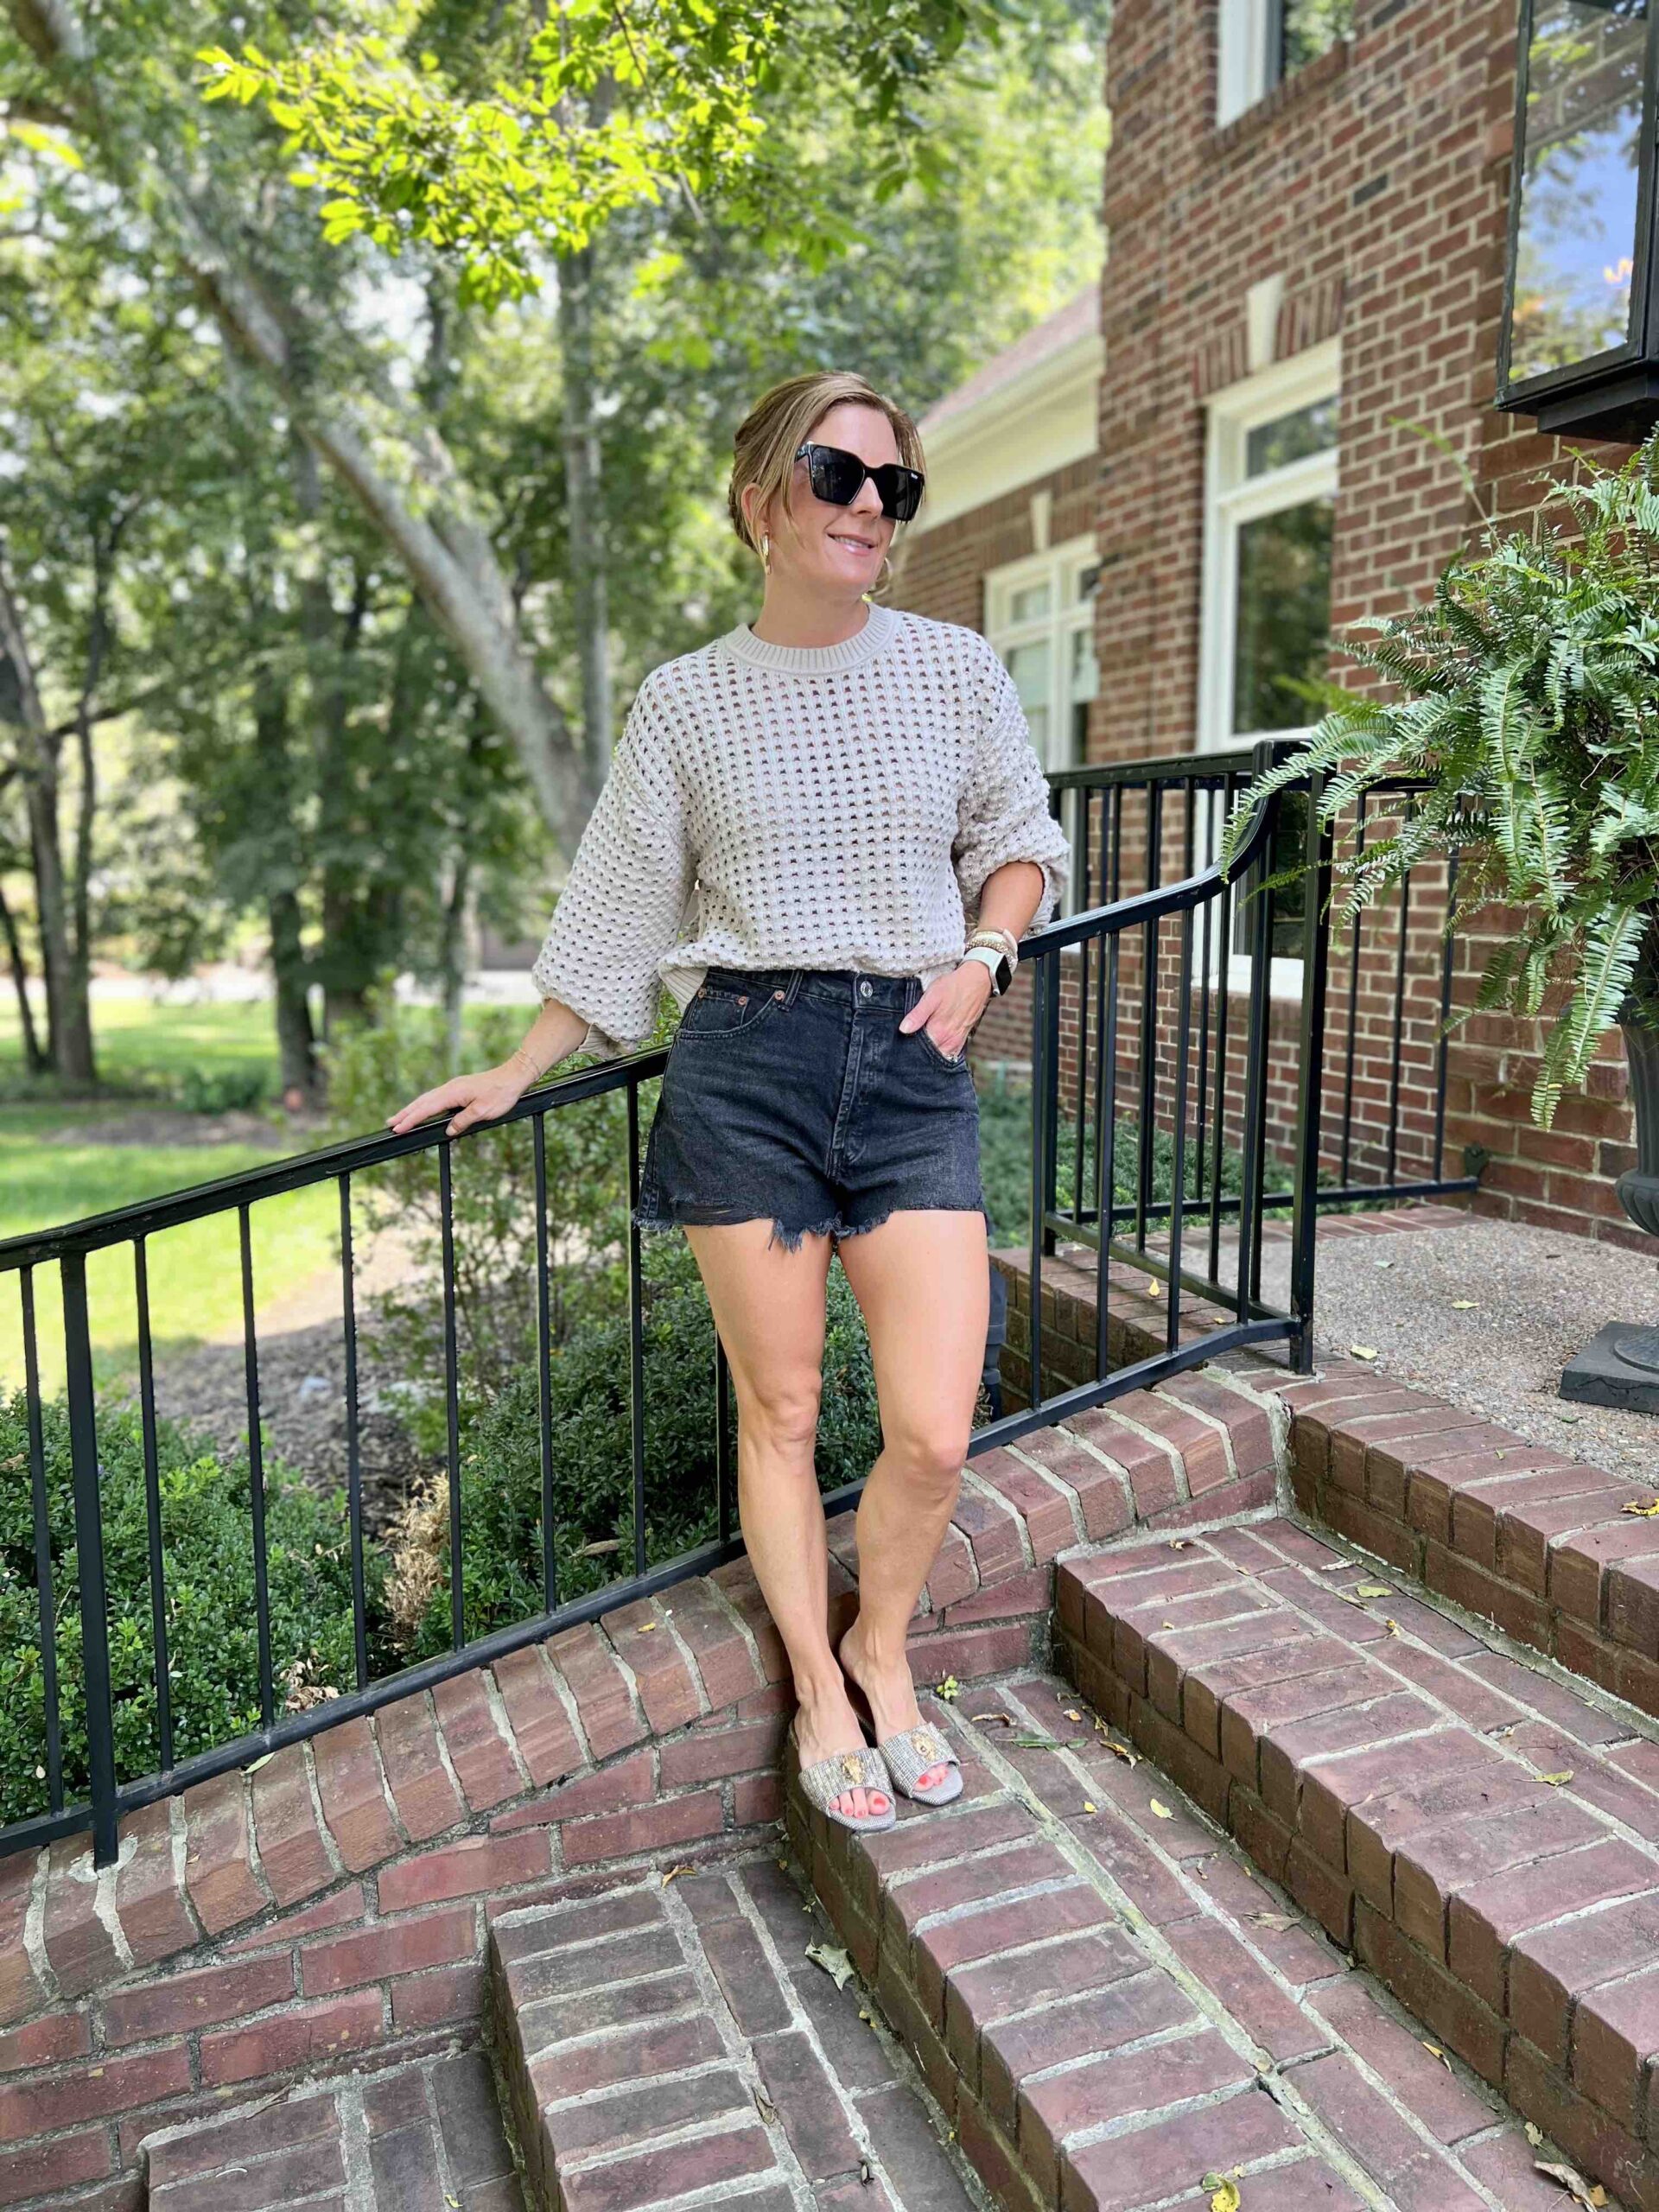 How To Dress For Fall When It's Still Hot Open Stitch Sweater & Black Cutoffs how to transition your outfits into fall how to dress for fall when it's hot how to dress for fall in hot weather what to wear in the fall in the southeast nashville stylists share fall style inspiration